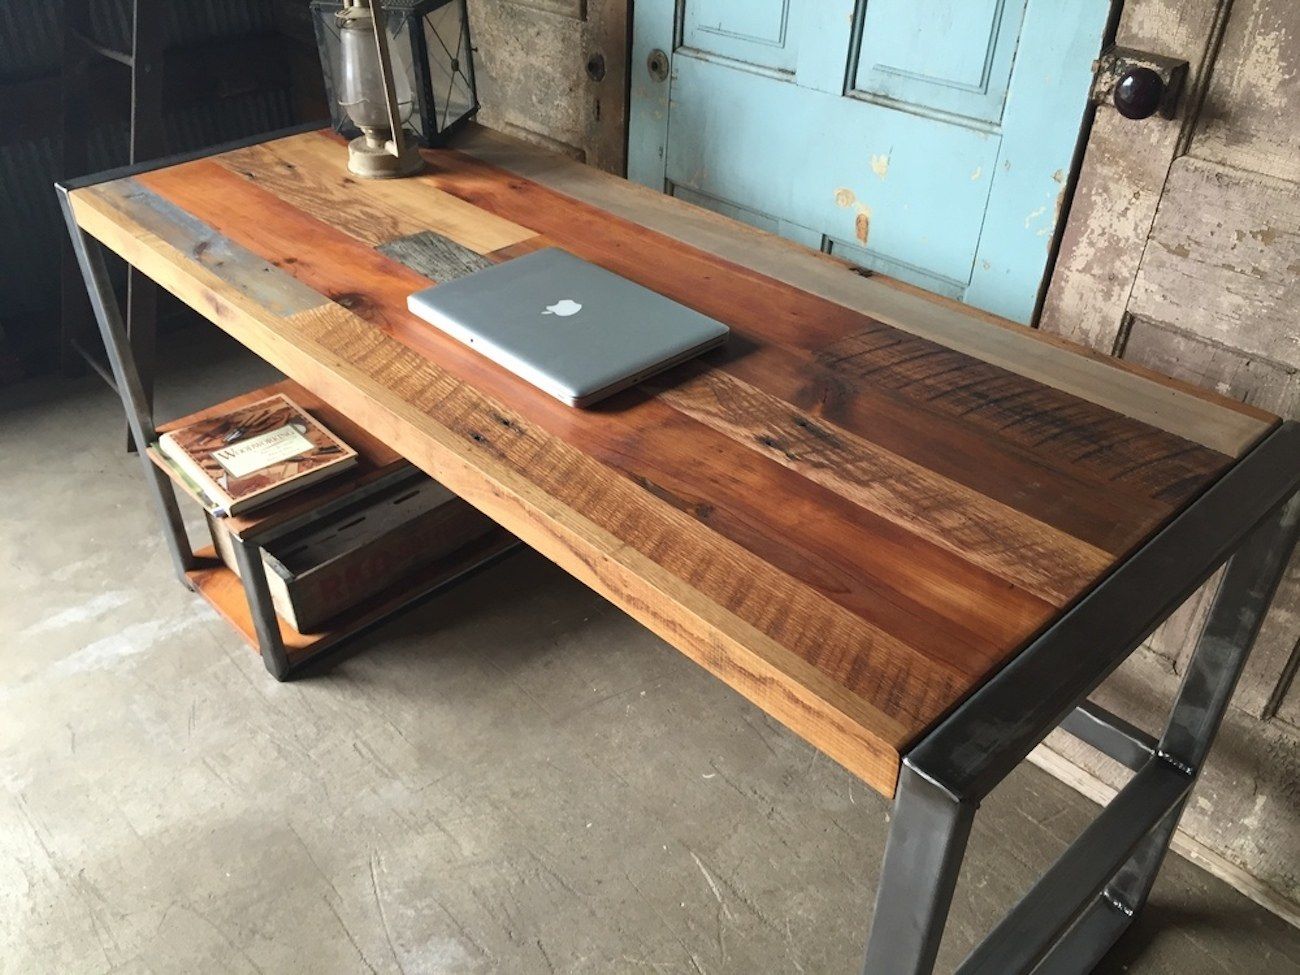 Reclaimed Wood Patchwork Desk » Gadget Flow Within Reclaimed Barnwood Wood Writing Desks (View 4 of 15)